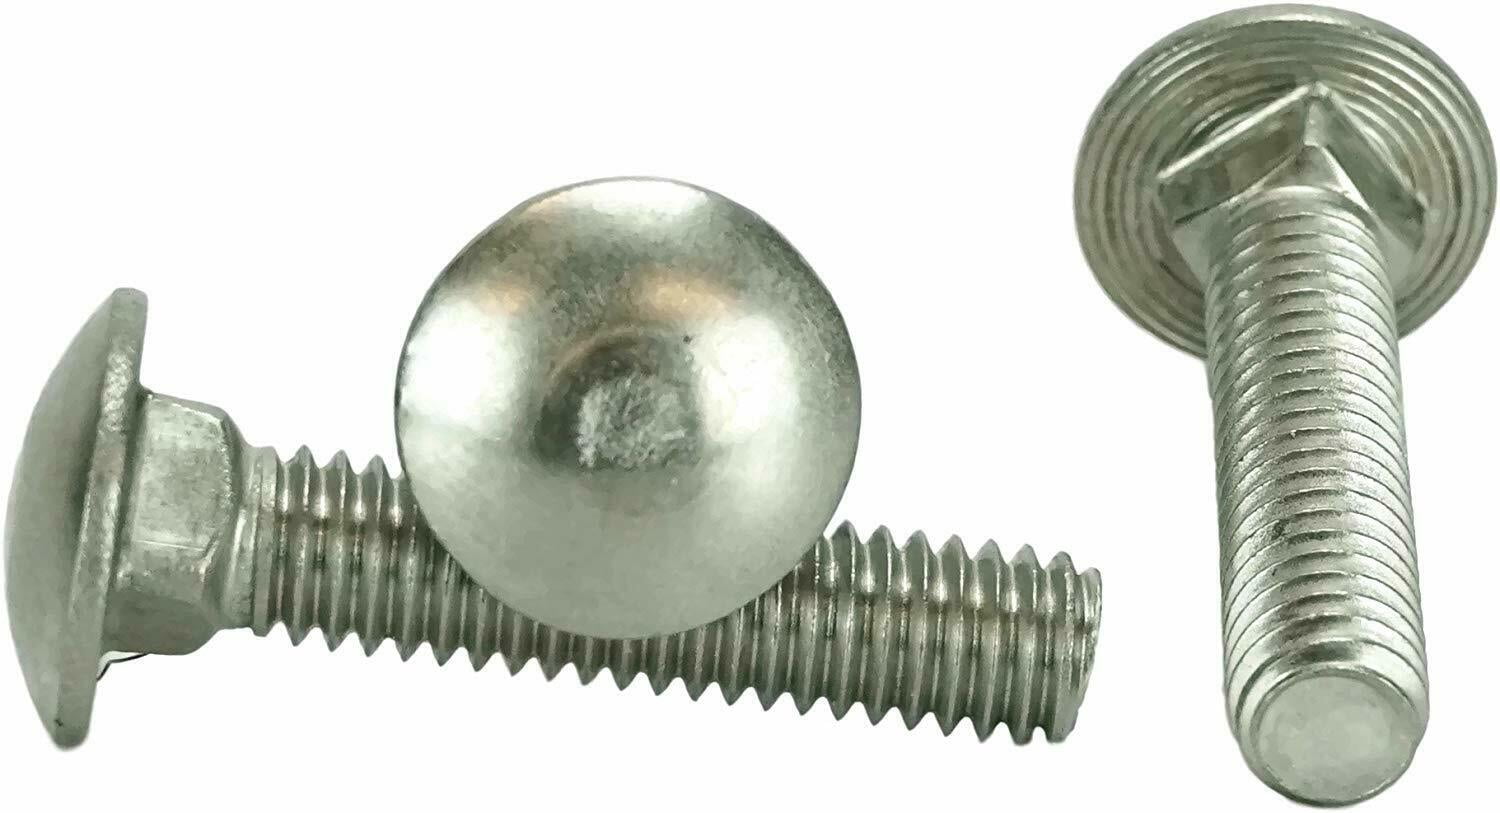 50 5/16-18x2 Stainless Carriage Bolts round Head Screws With Nuts & Washers 